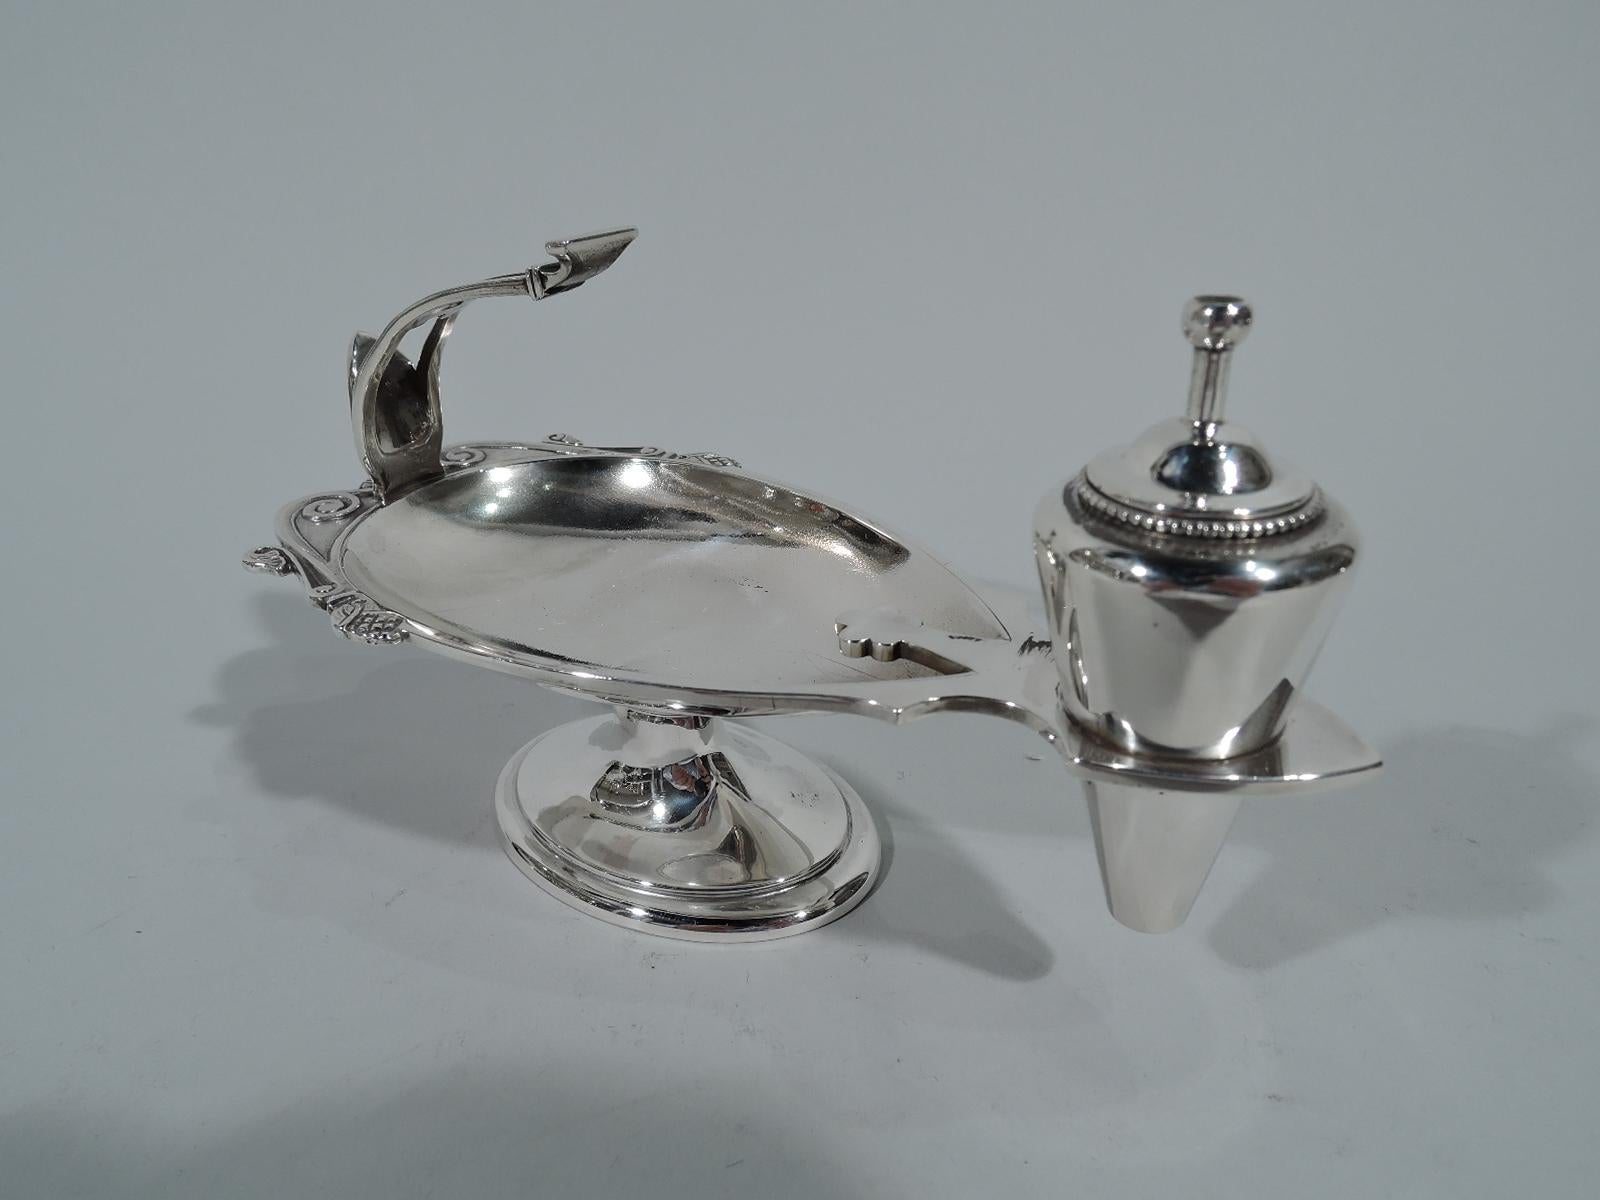 Greek Revival sterling silver cigar lighter in form of ancient oil lamp. Made by Tiffany & Co. in New York. Oval bowl with rim scrolls and buds. Flying open scroll handle with palmette thumb rest. Raised oval foot and conical receptacle for holding